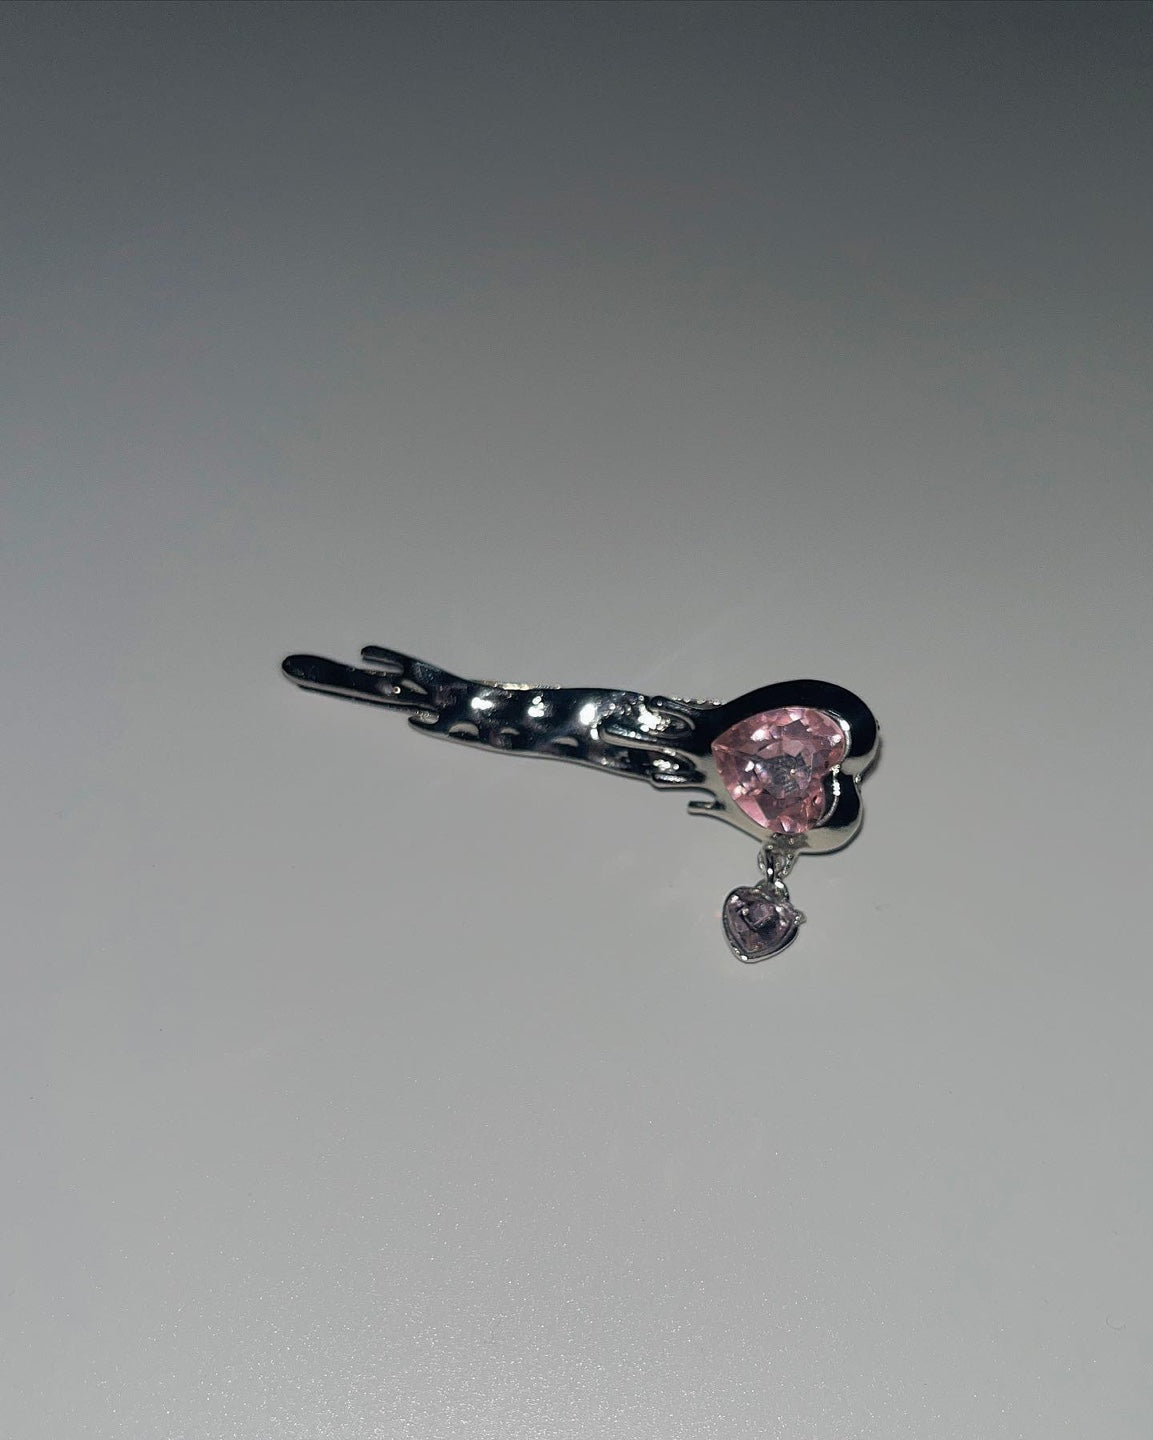 Melted pink heart hairpin